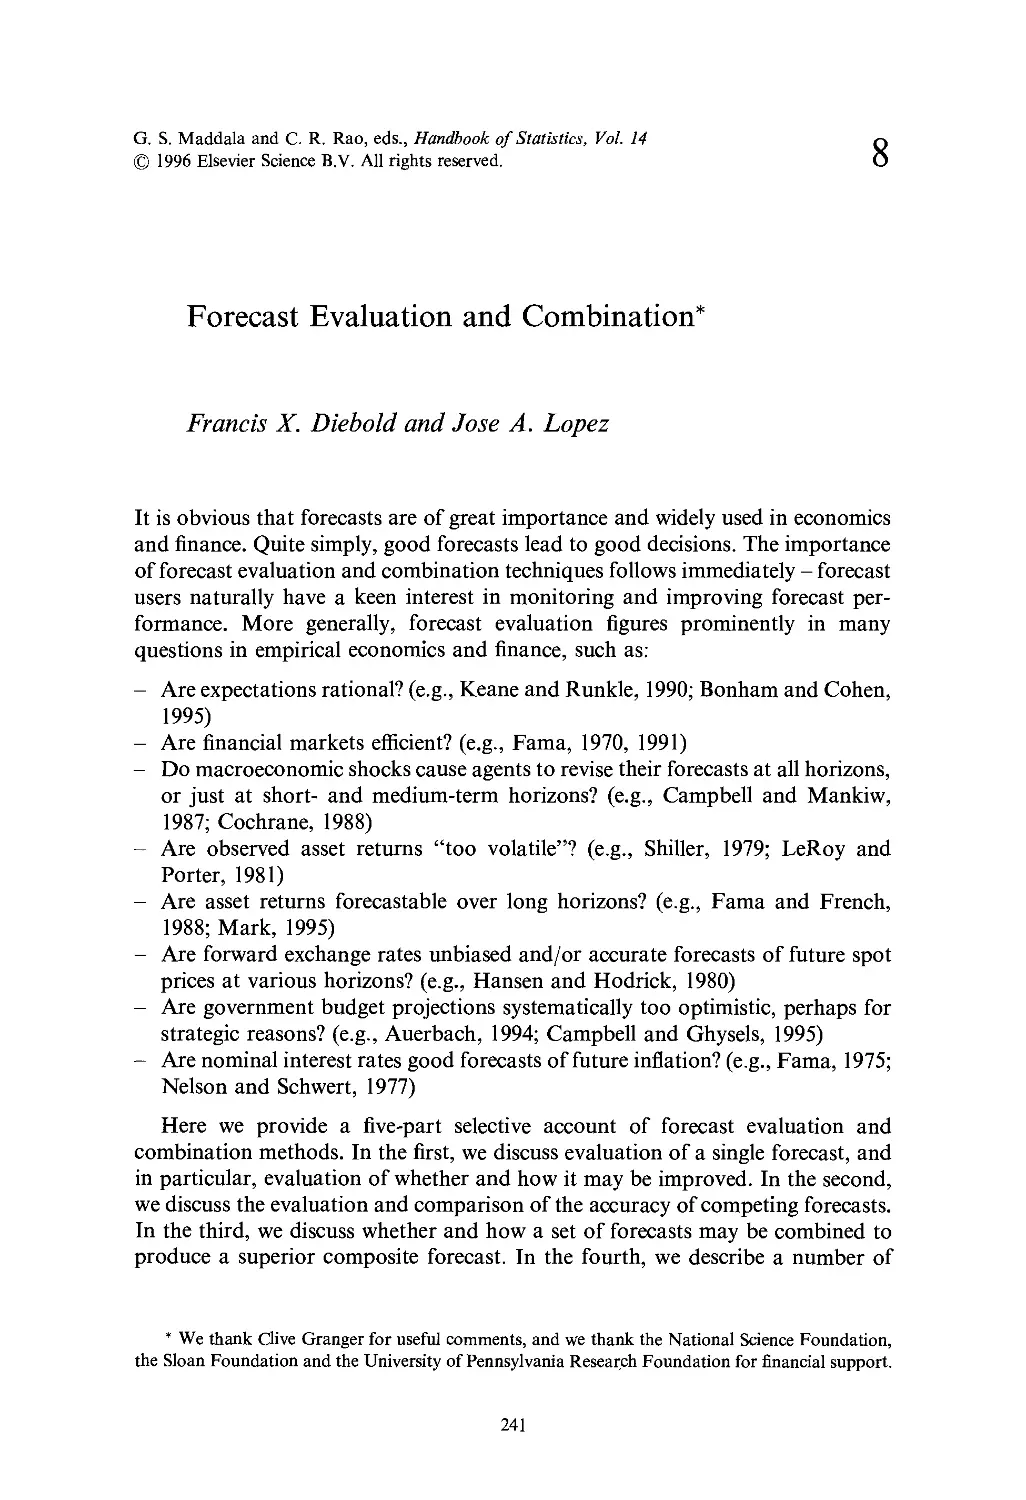 8. Forecast Evaluation and Combination